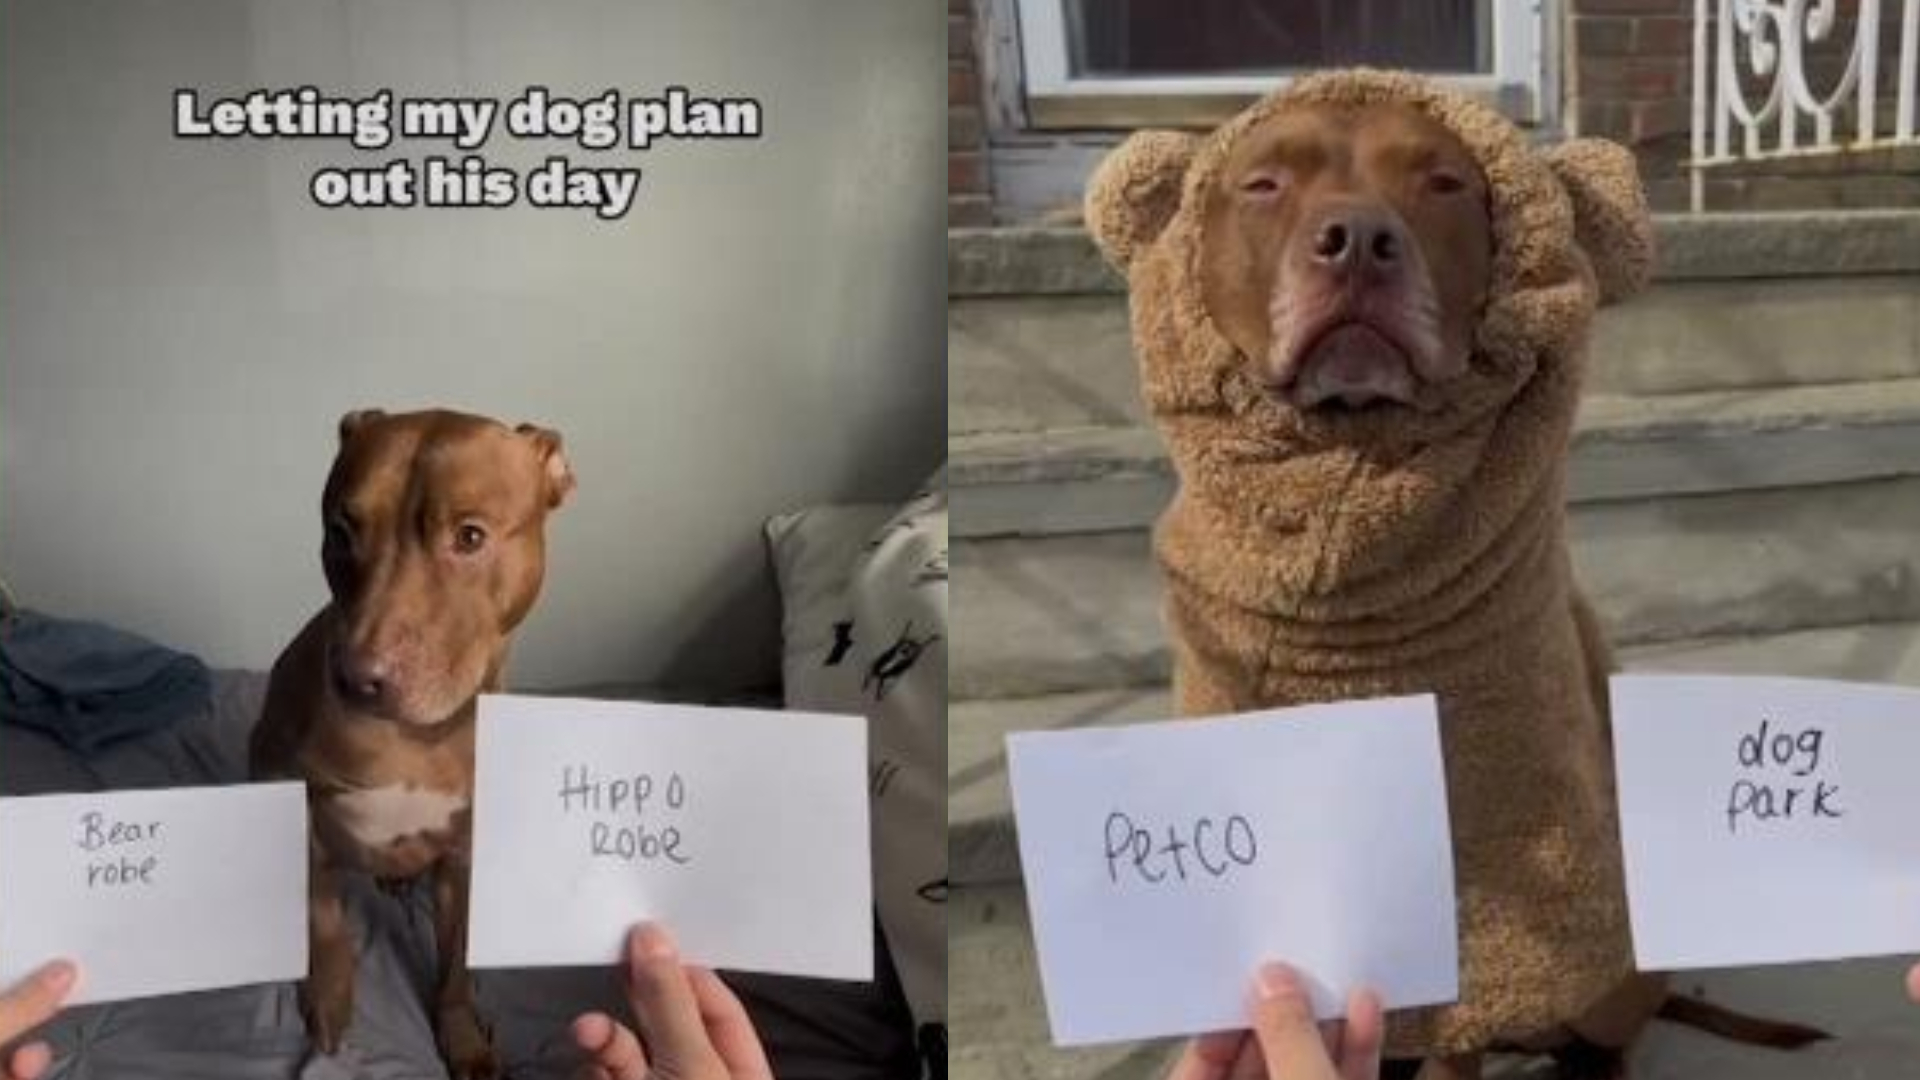 This dog planned out his own day all by himself